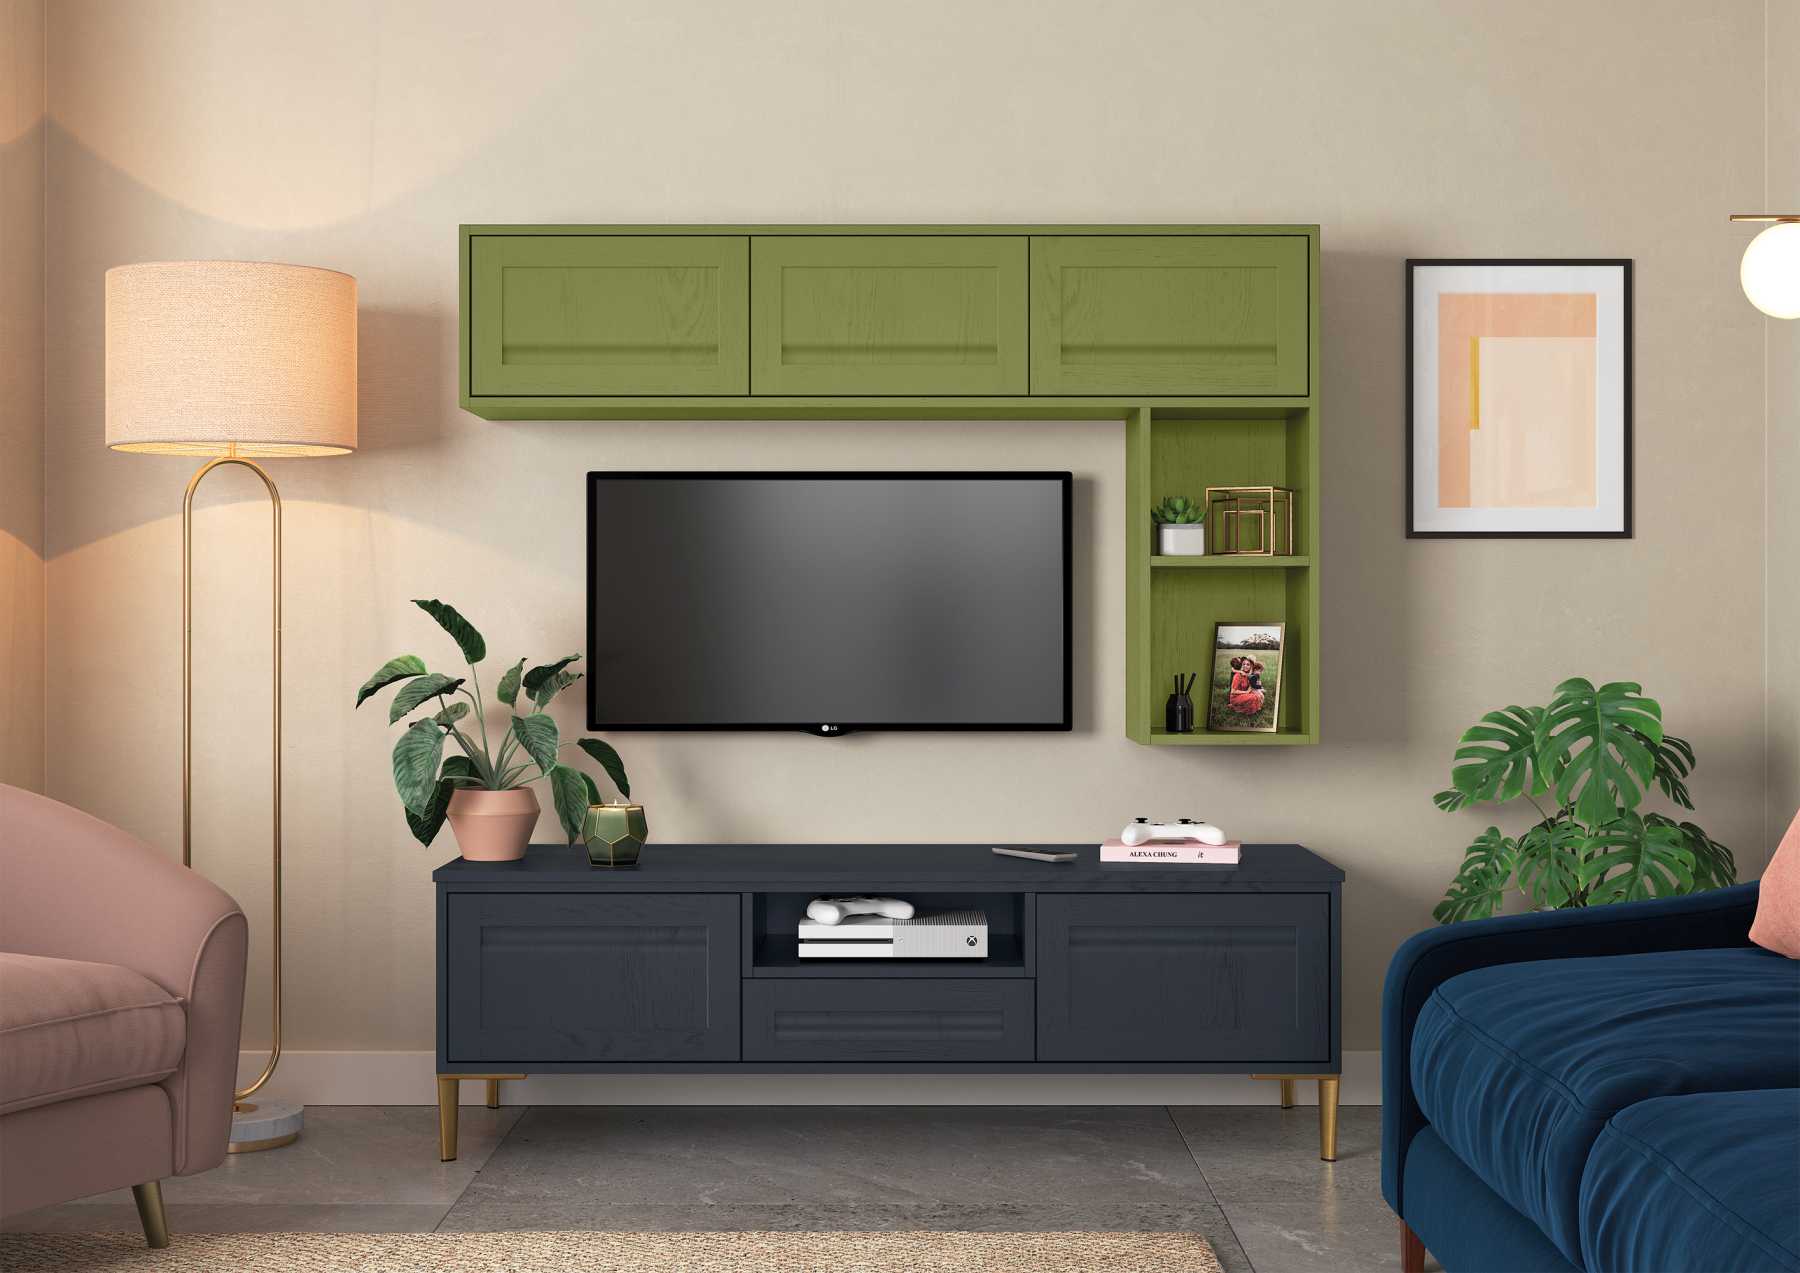 Handleless Shaker-Style Kitchen Painted Slate Blue and Citrus Green featuring complementary cabinets which frame the TV